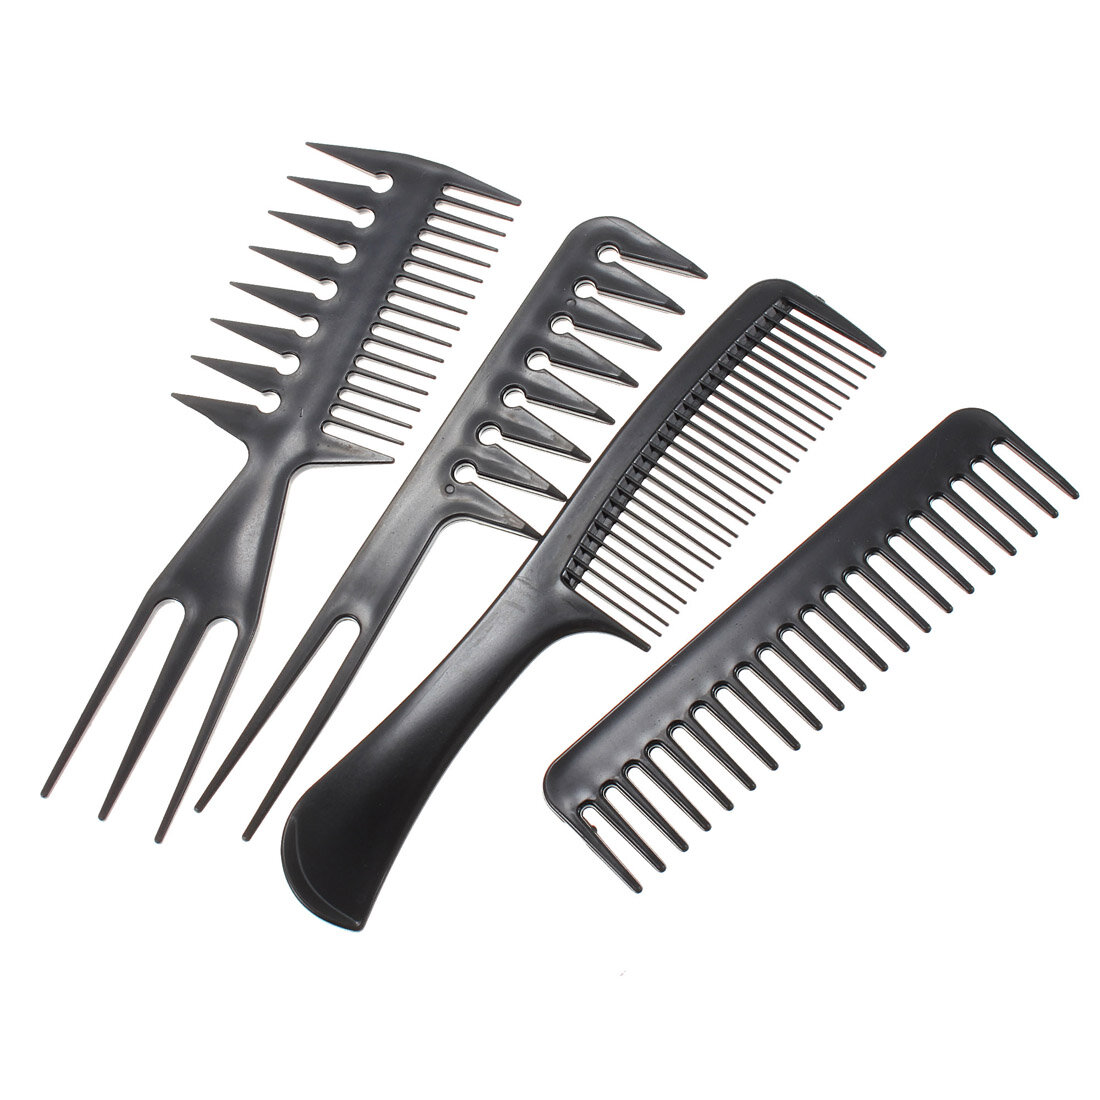 Professional Salon Hair Styling Hairdressing Plastic Combs - US$3.69